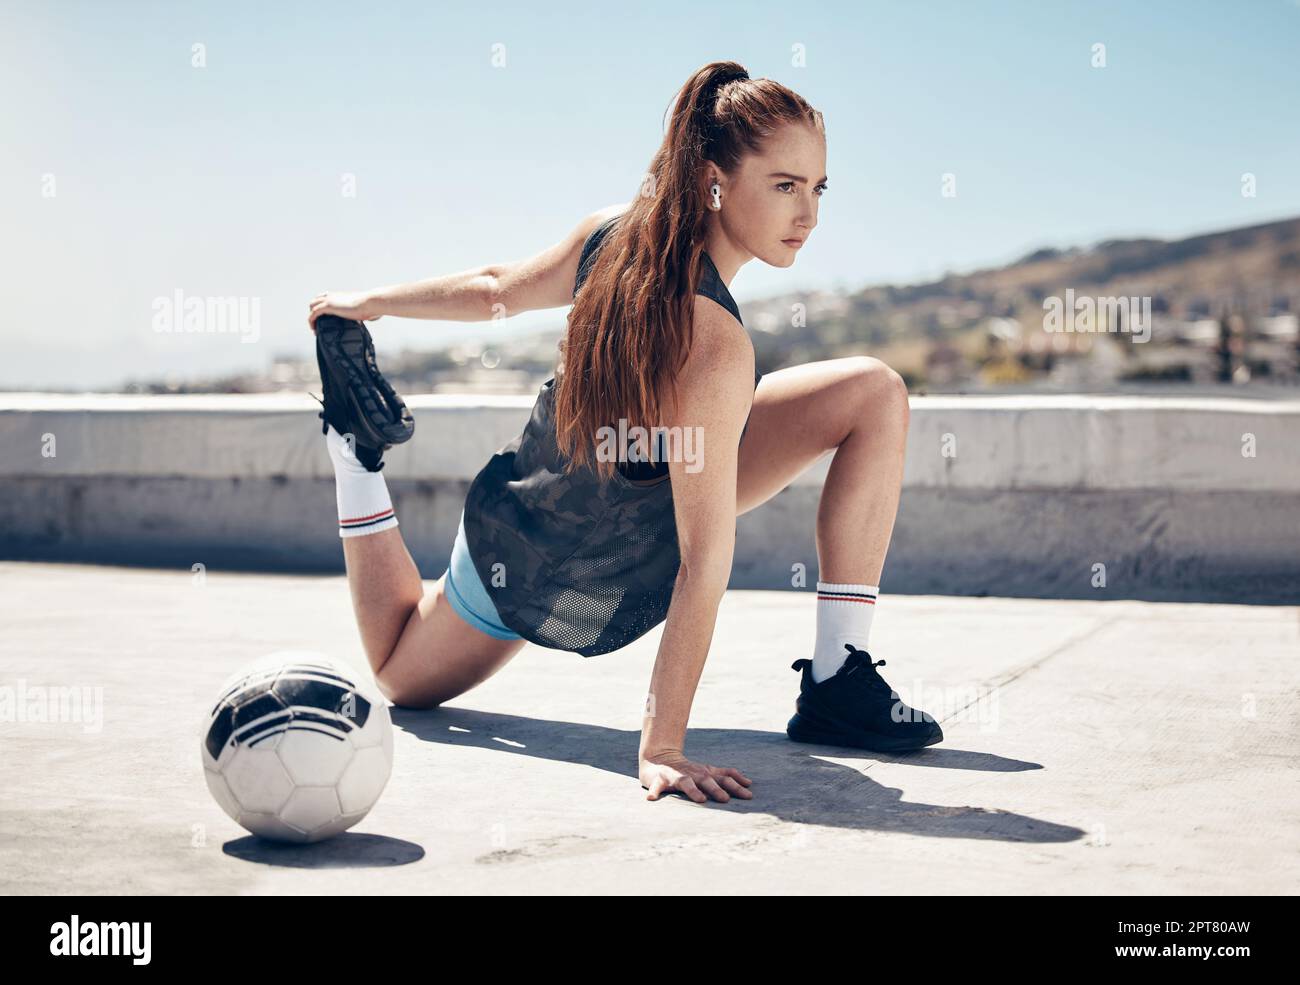 Soccer, woman stretching legs and rooftop sports game of athlete commitment  outdoor. Focus young girl football player, motivation and goals, body flex  Stock Photo - Alamy